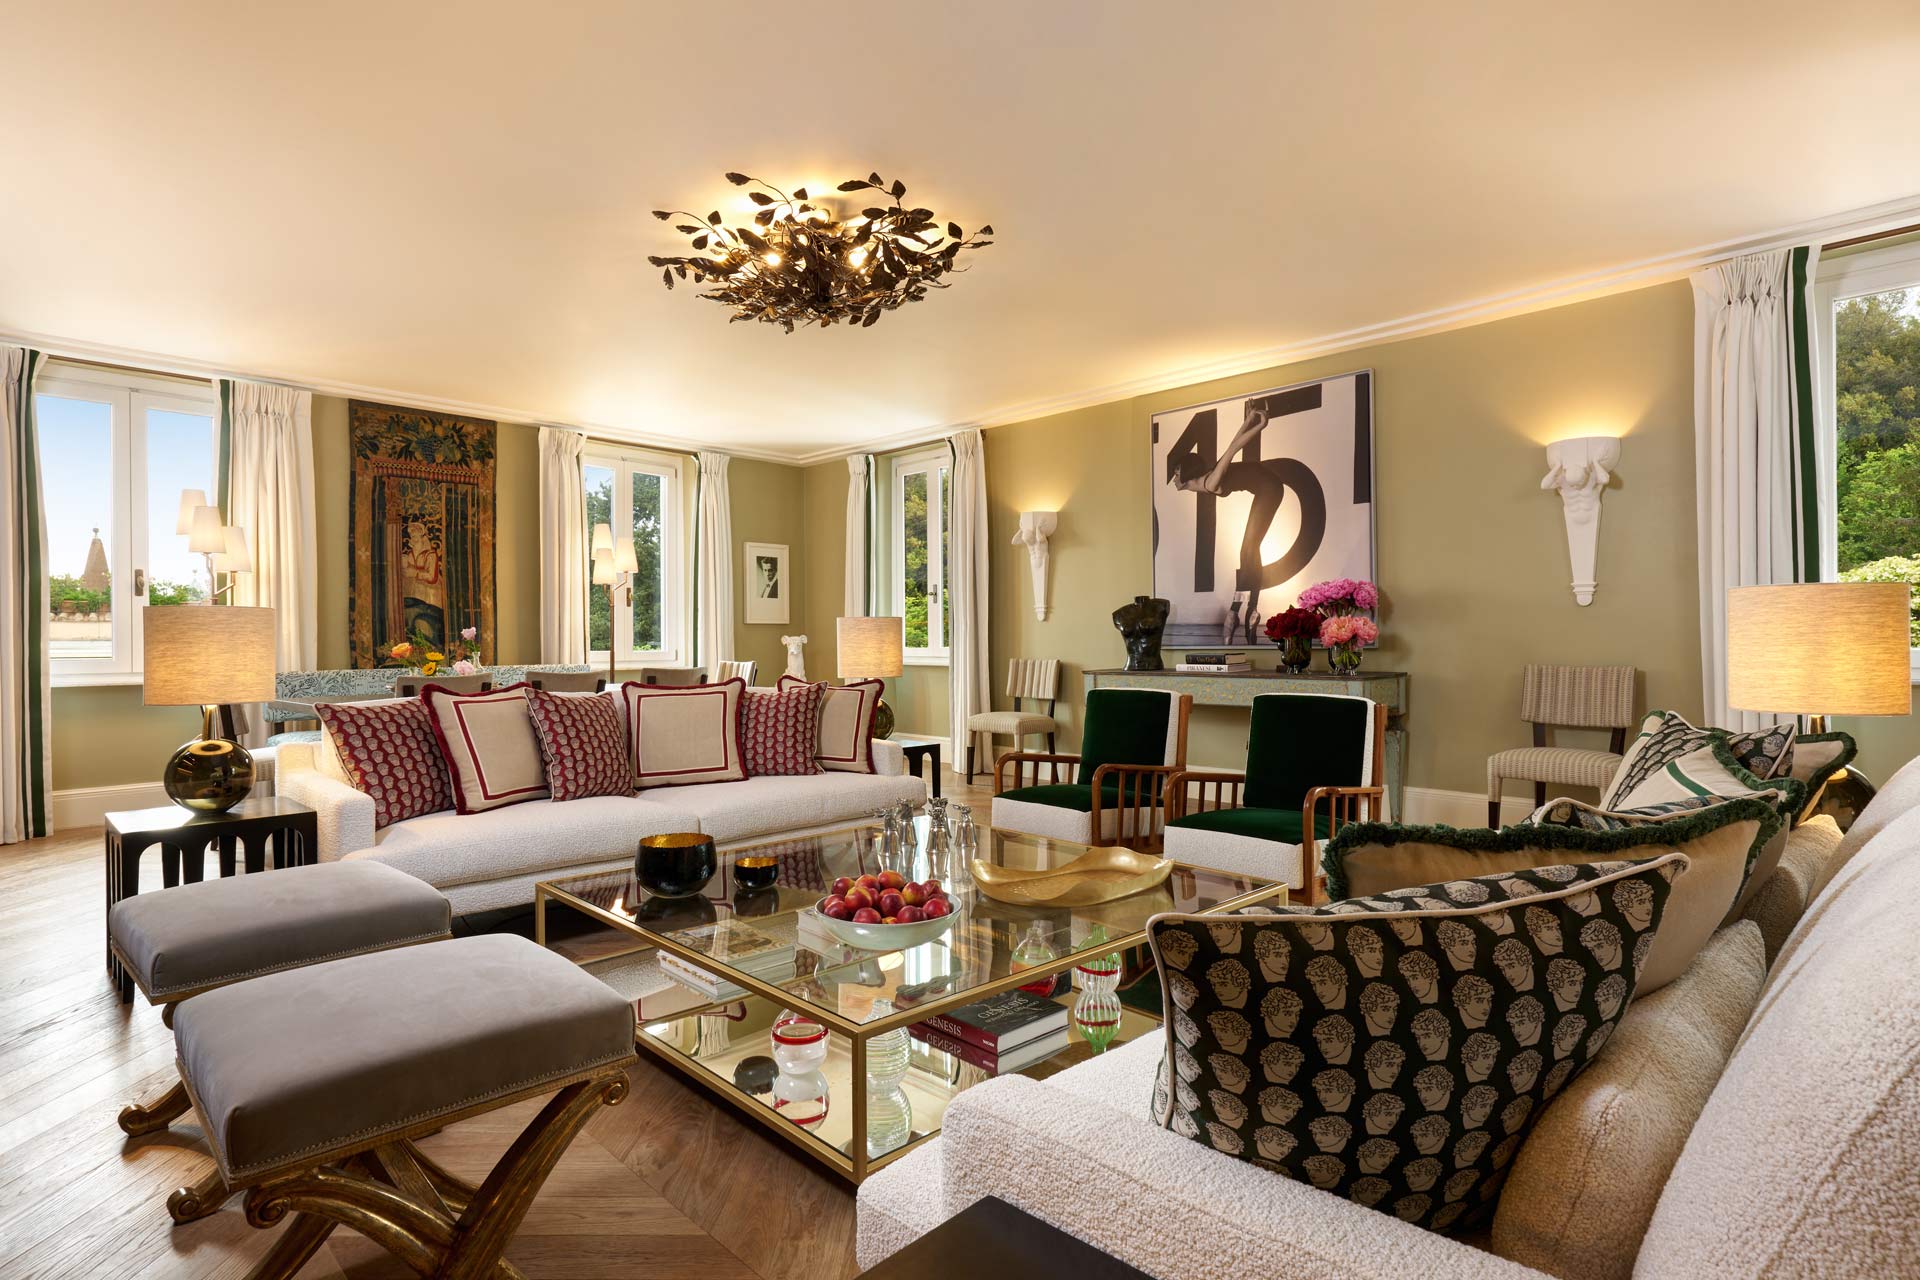 Rocco Forte revamps presidential suite at Hotel de Russie - Sleeper